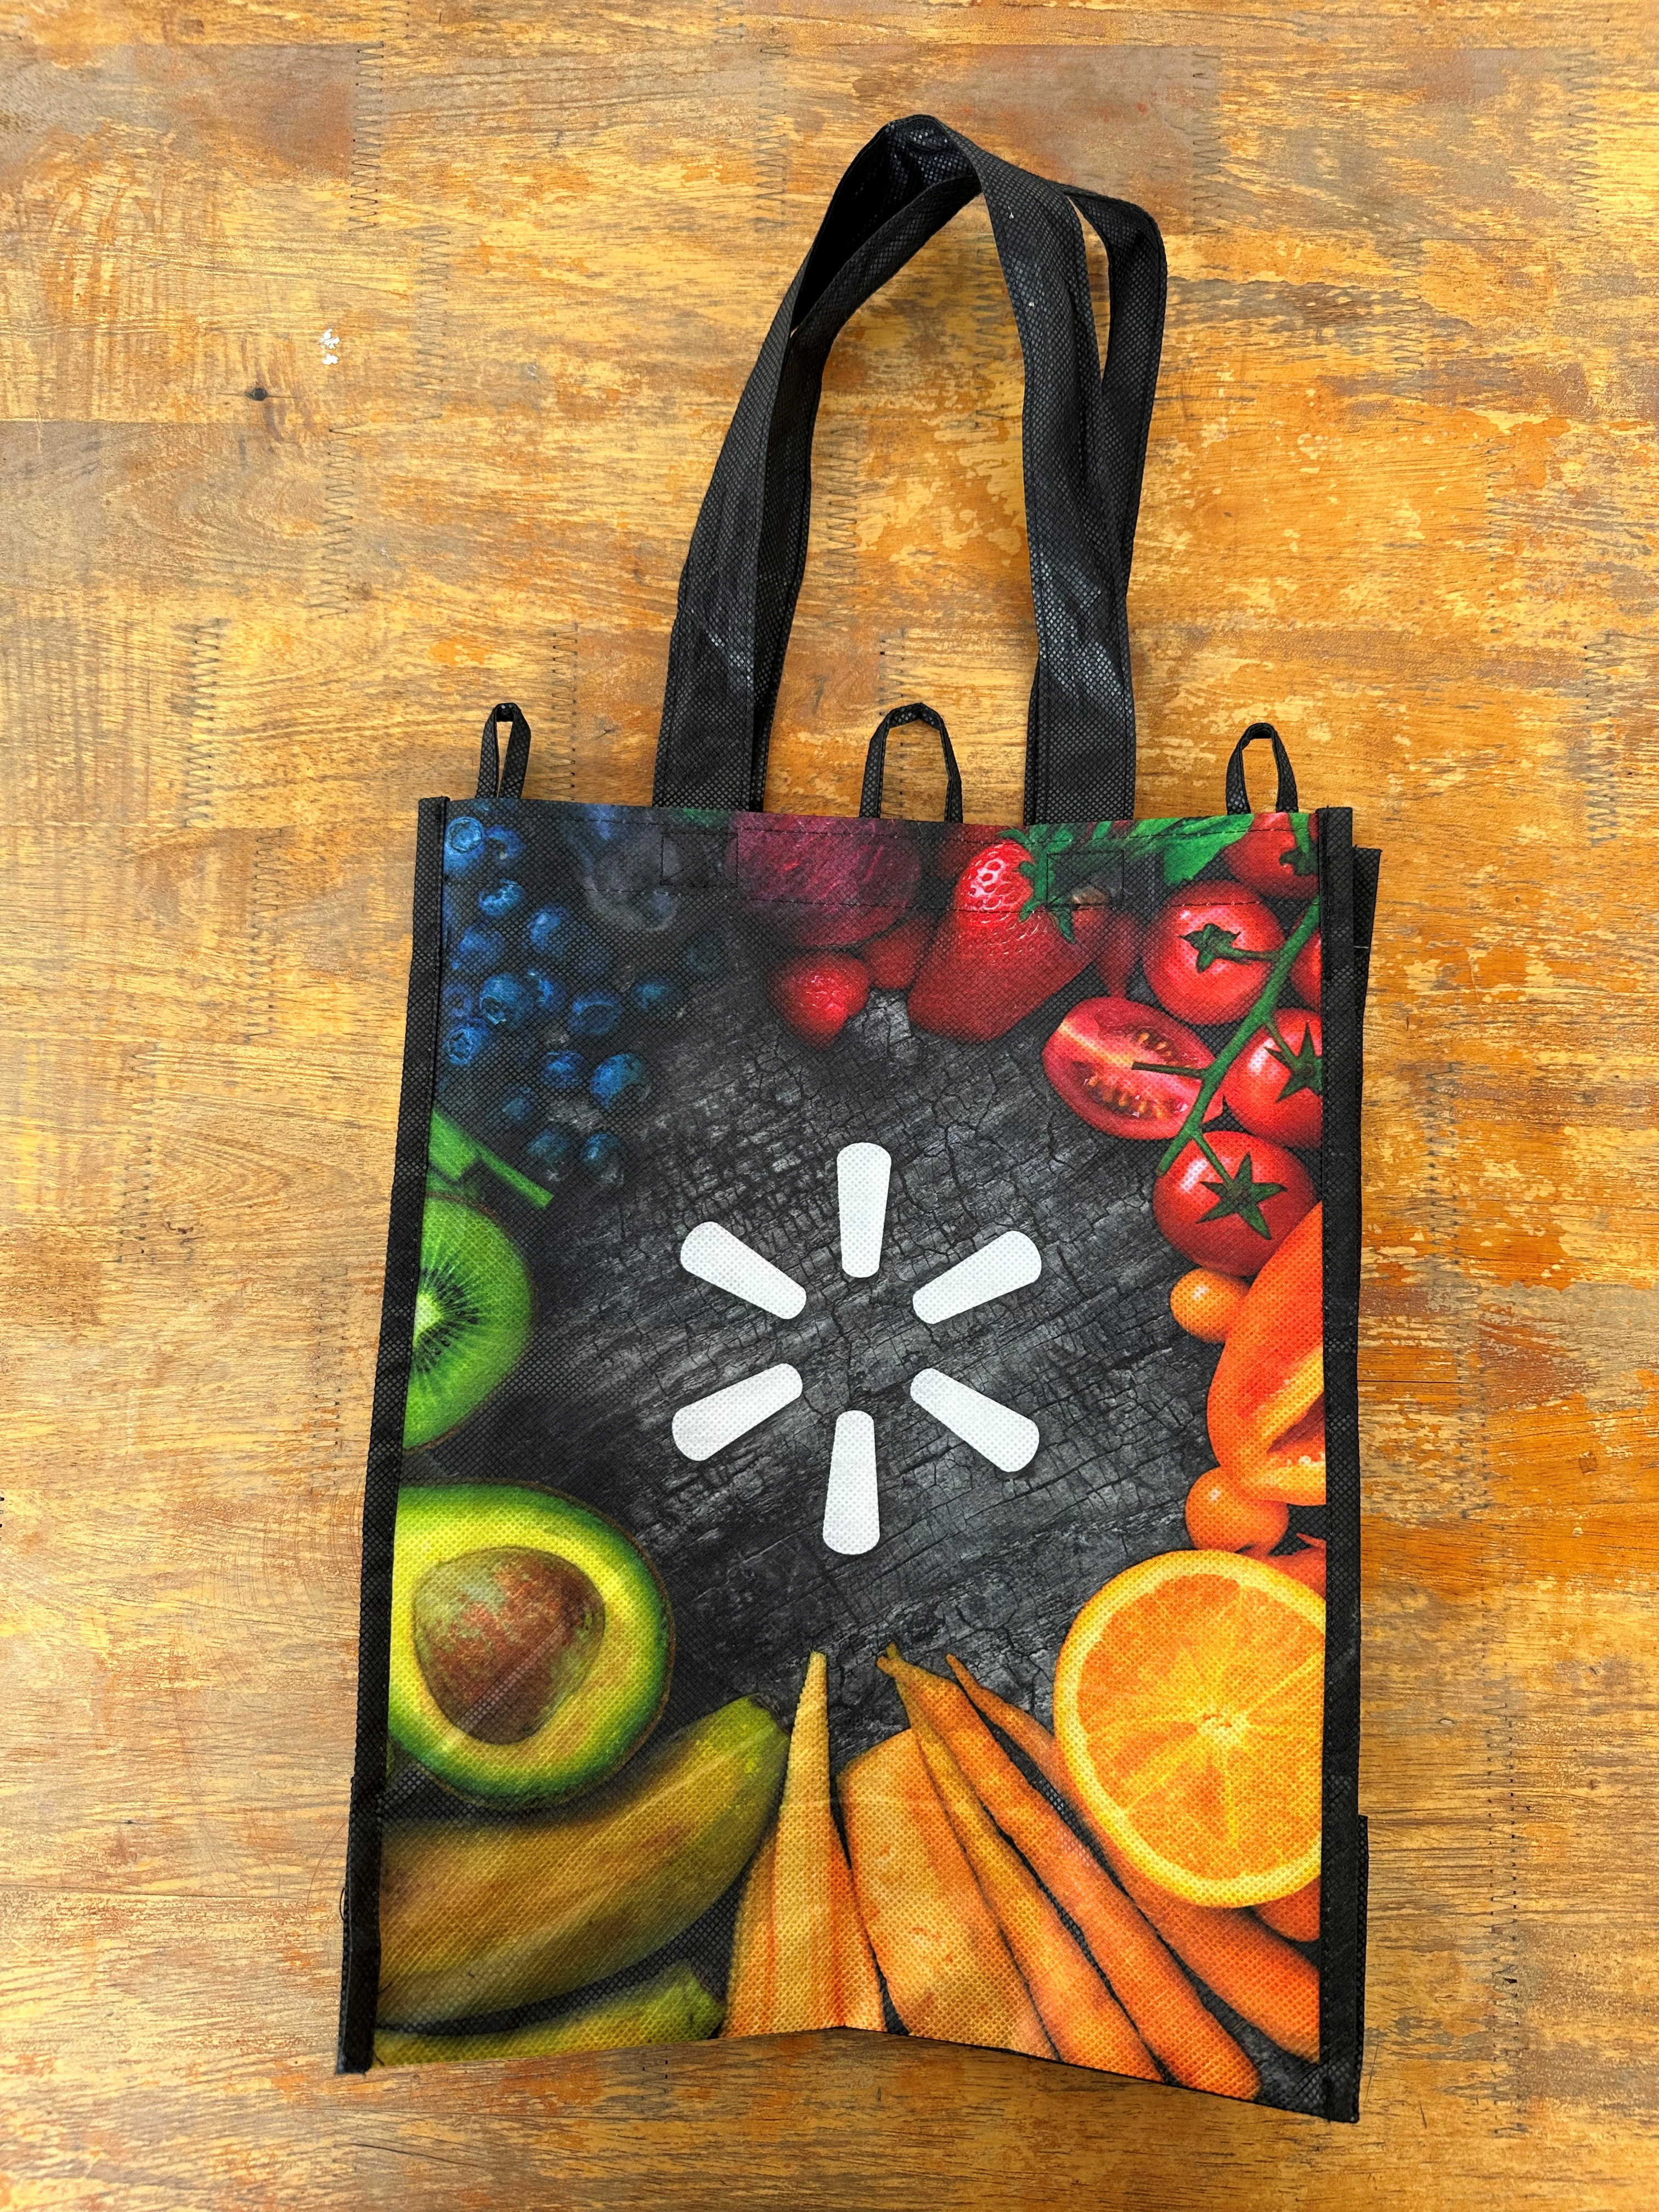 A reusable shopping bag with a Walmart logo that a former inmate at Correctional Center 2, a women’s prison on the outskirts of Phnom Penh, said was made in a factory on prison grounds in Cambodia